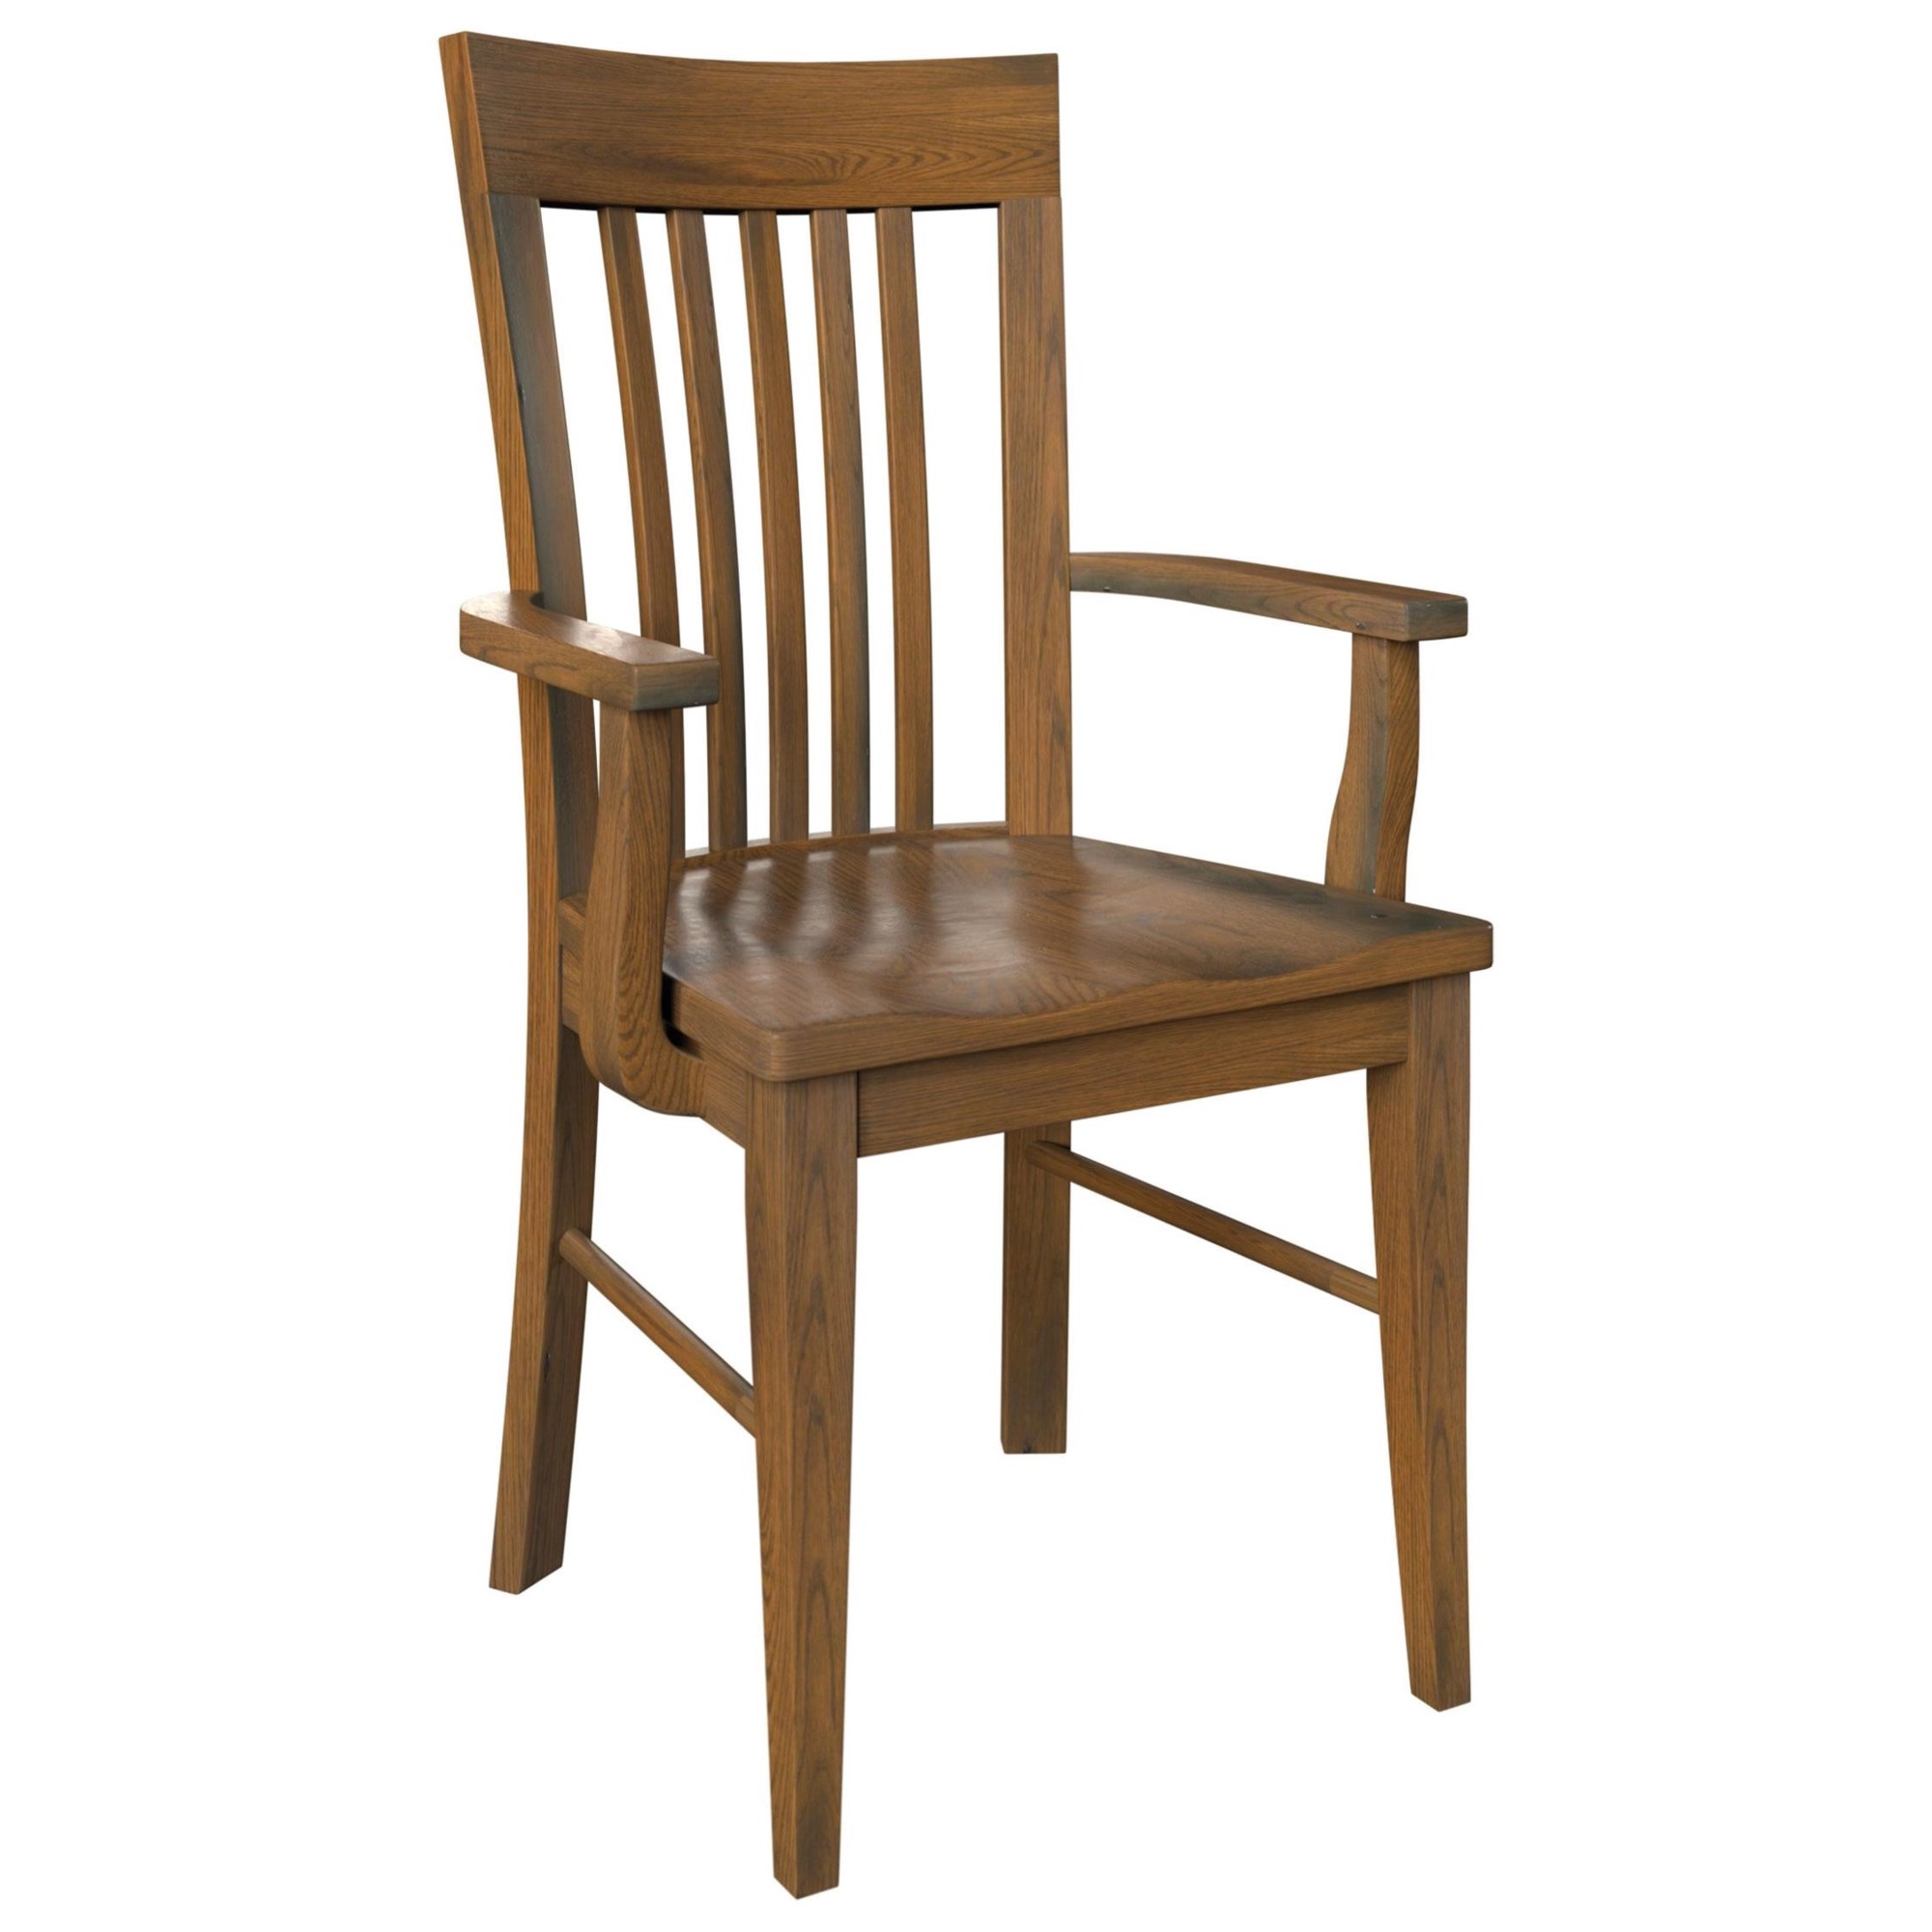 Dining Chair, Wood Cushion Chair, Rustic Chair, Solid Wood and Leather Chair,  Oak Chair, Wooden Chair. 